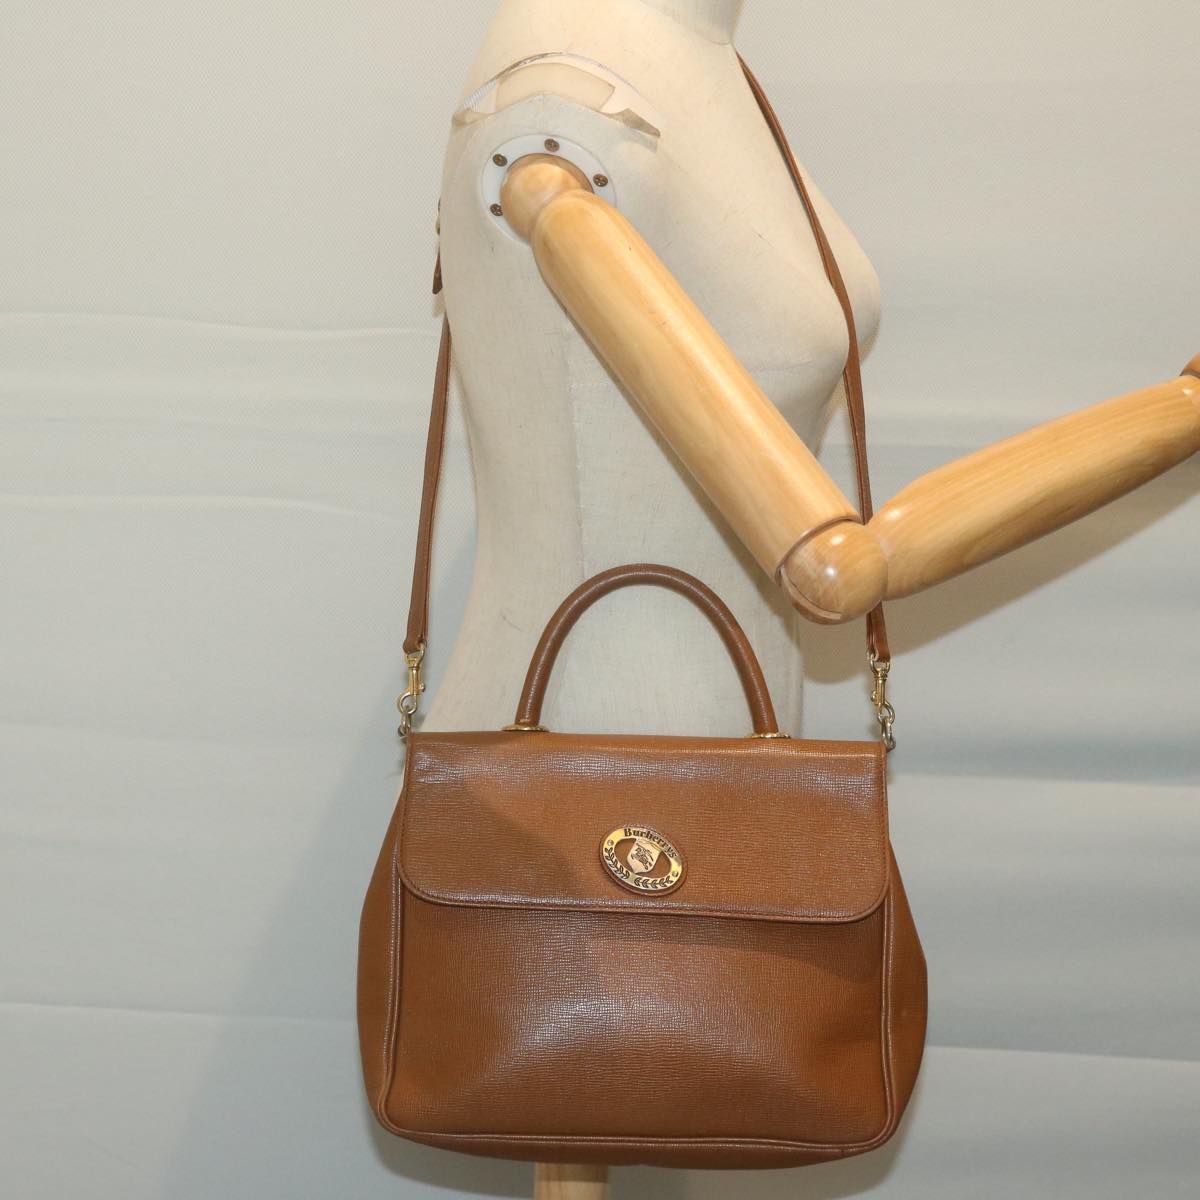 Burberrys Hand Bag Leather 2way Brown Auth bs11814